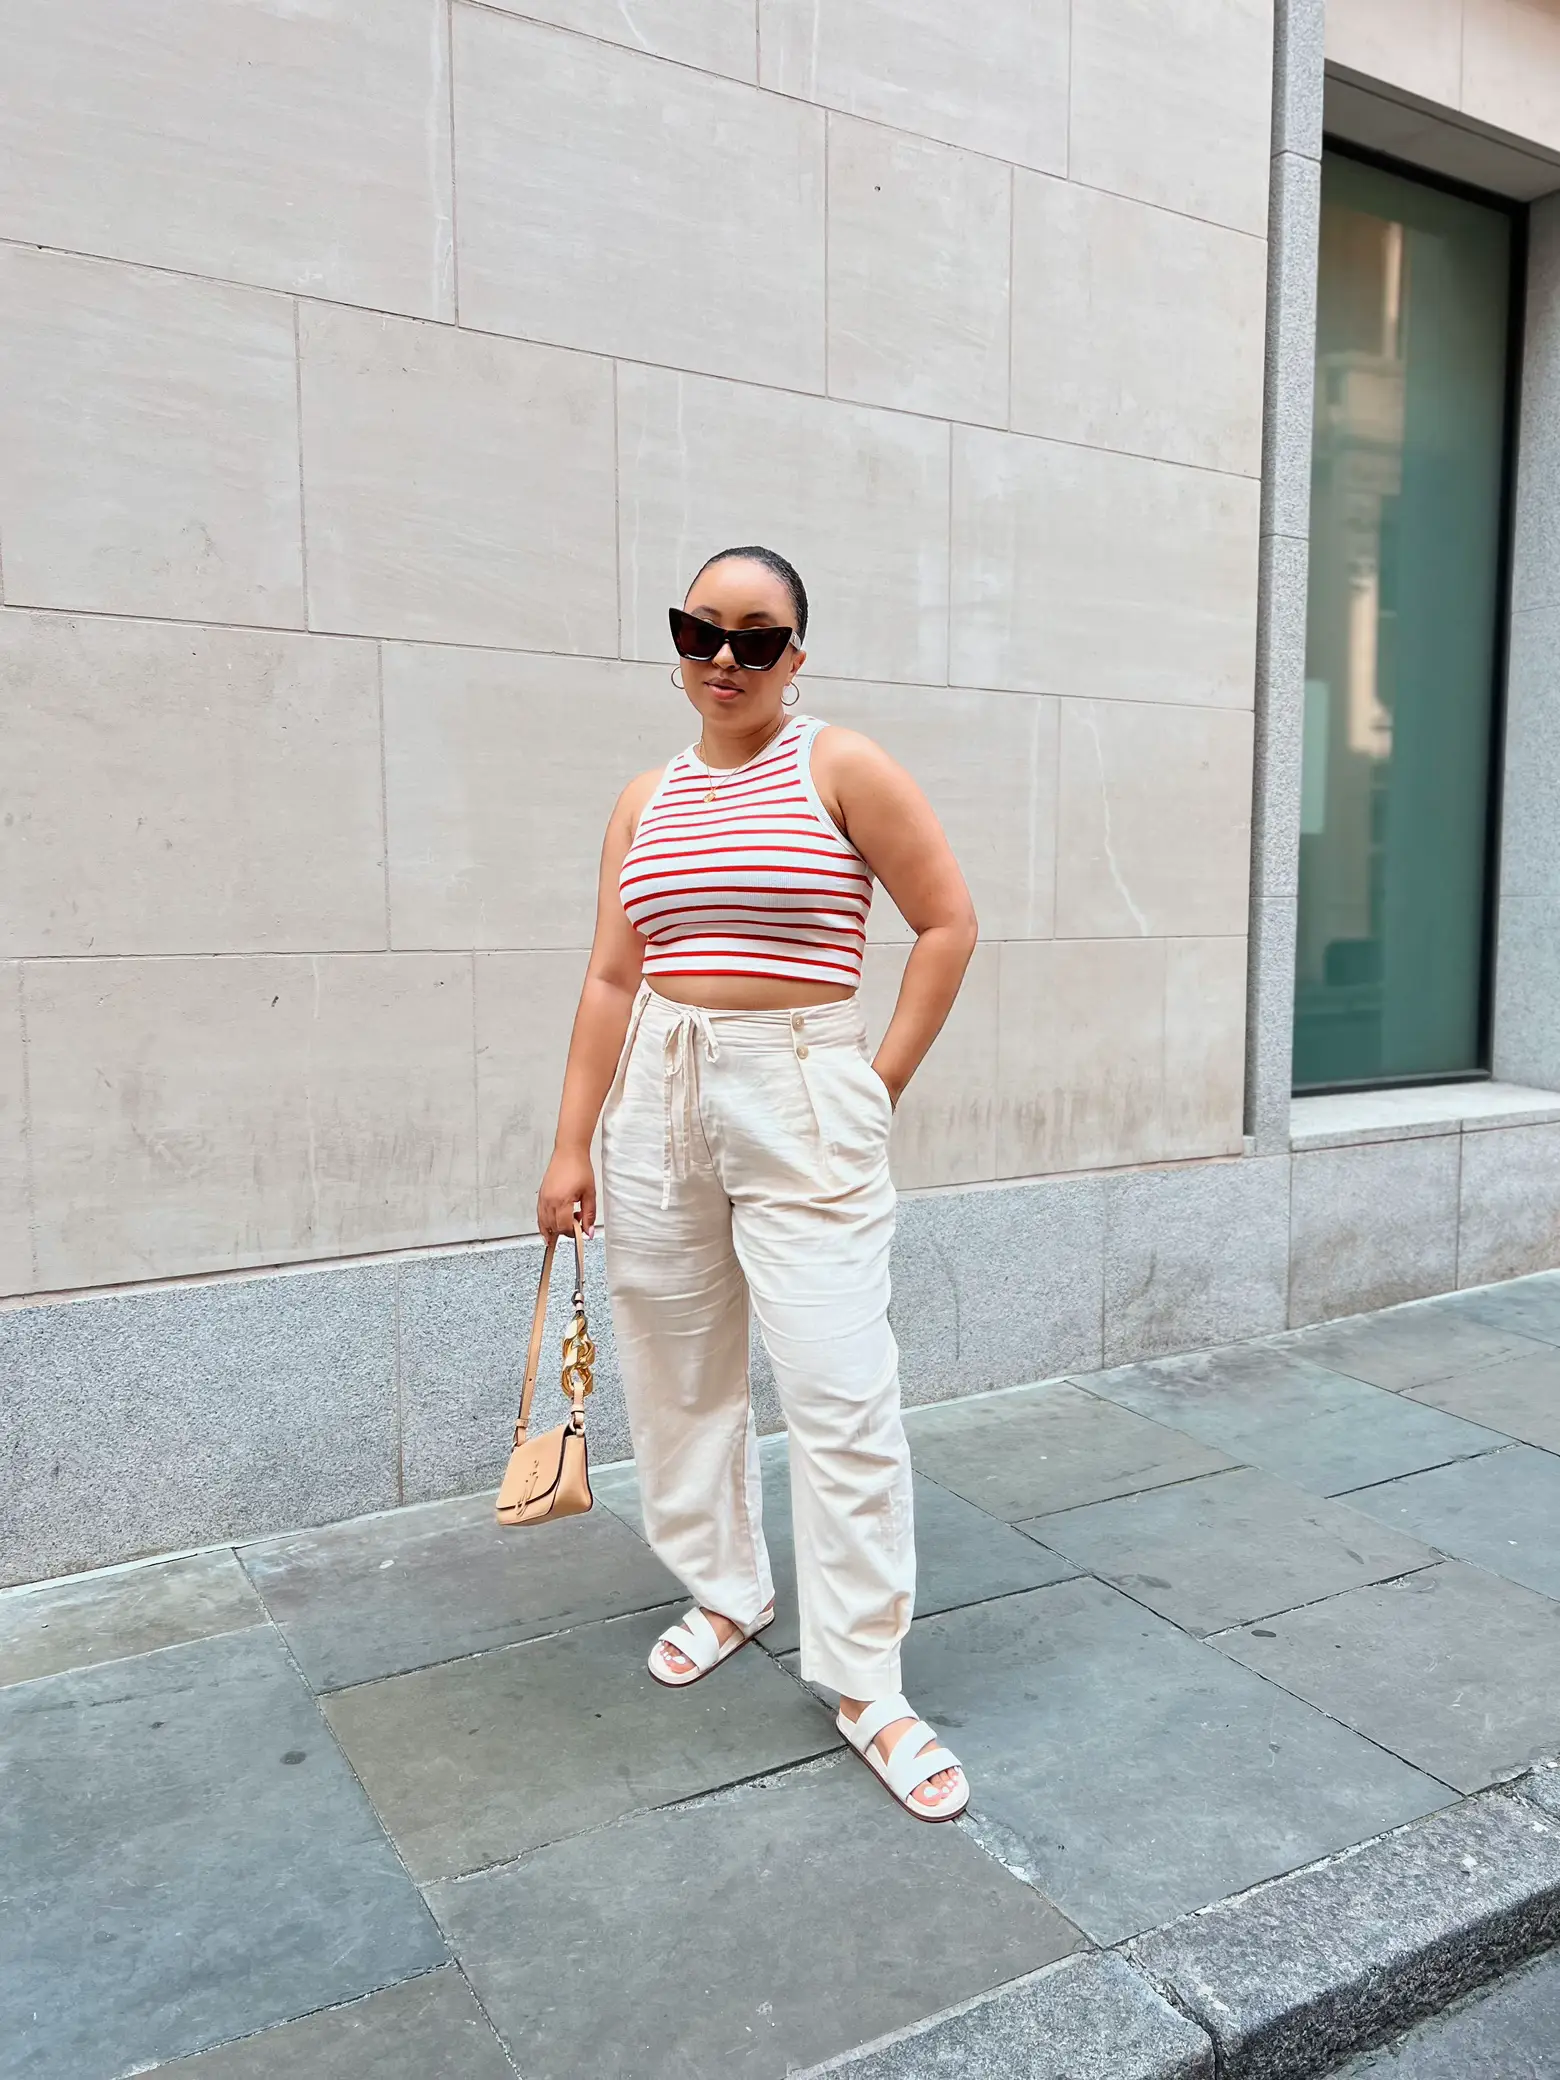 short and chubby girl fashion- cropped top edition #fashioninspo #mids